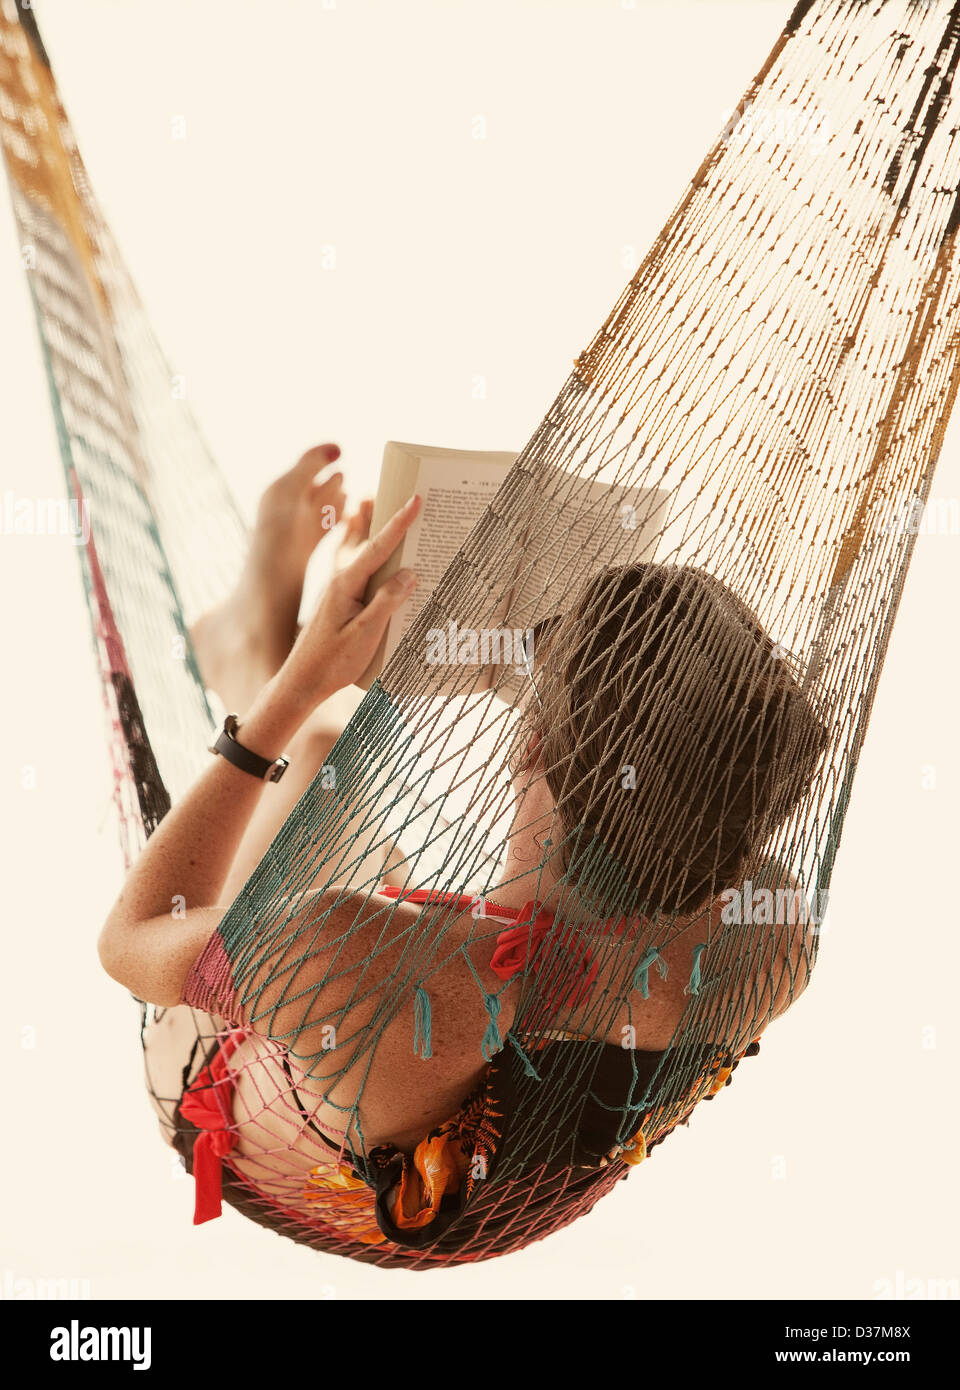 Woman Reading book in hammock Banque D'Images